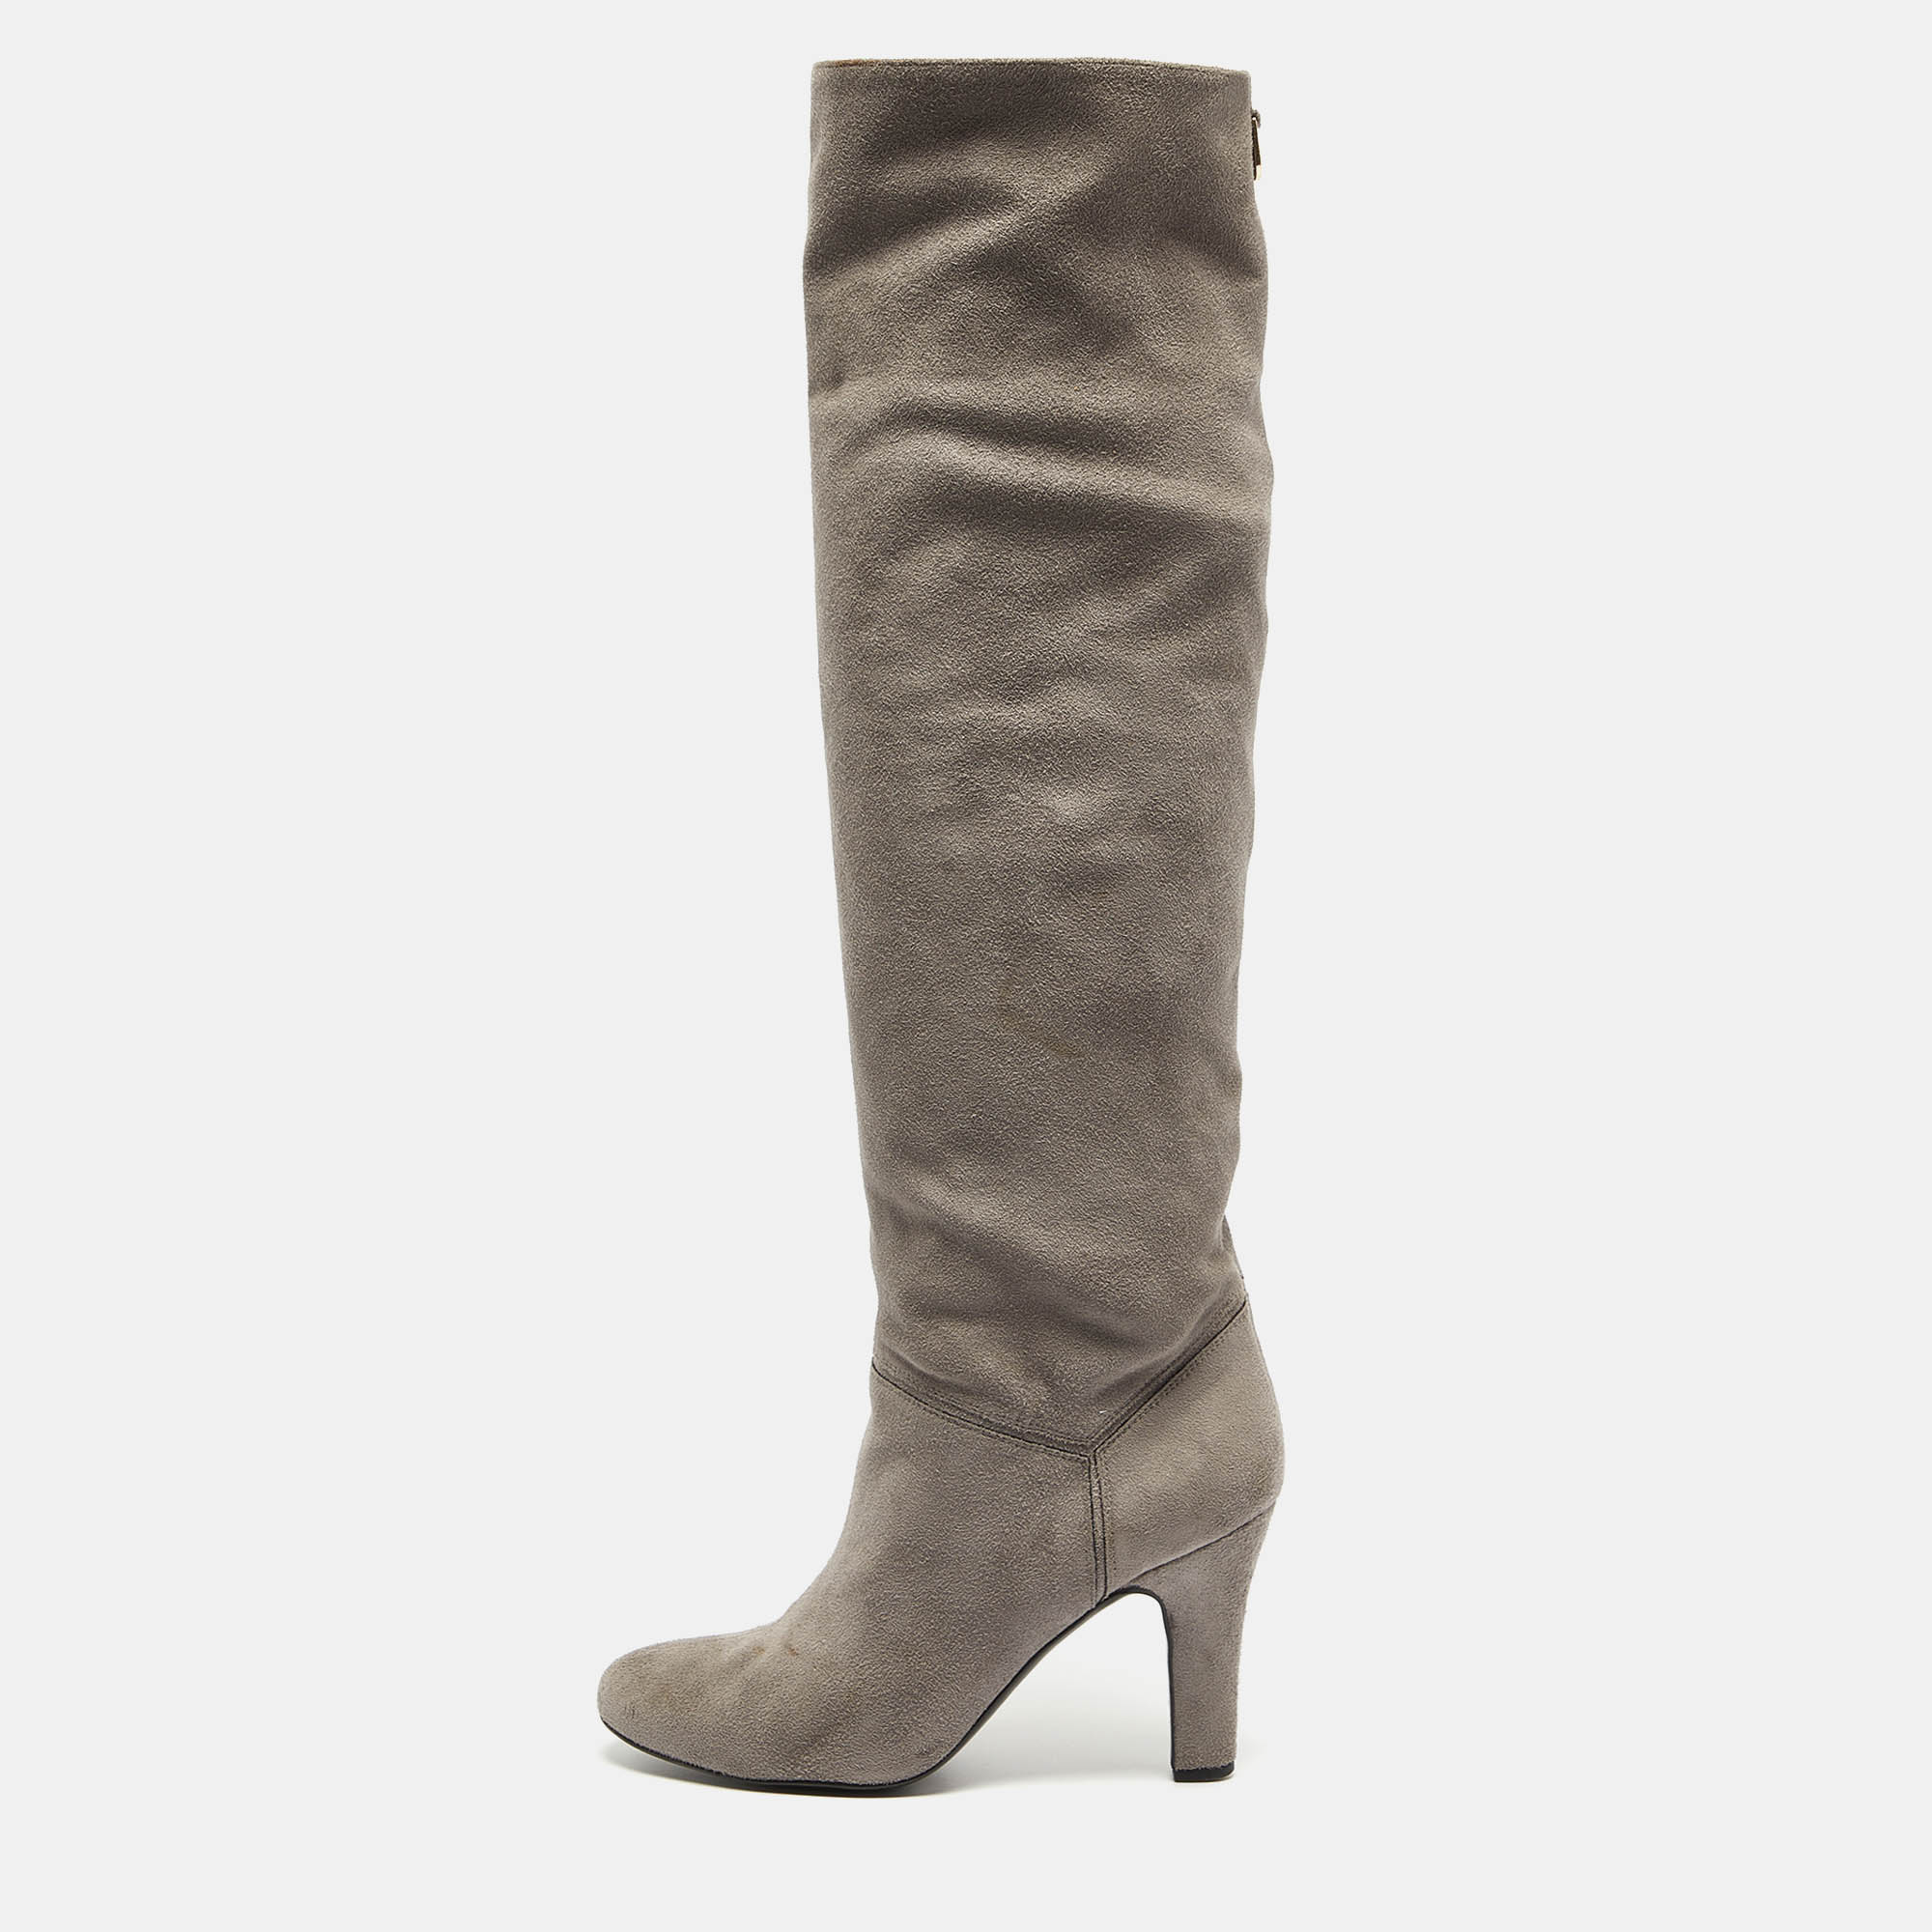 Stella McCartney Grey Suede Knee Length Boots Size 39